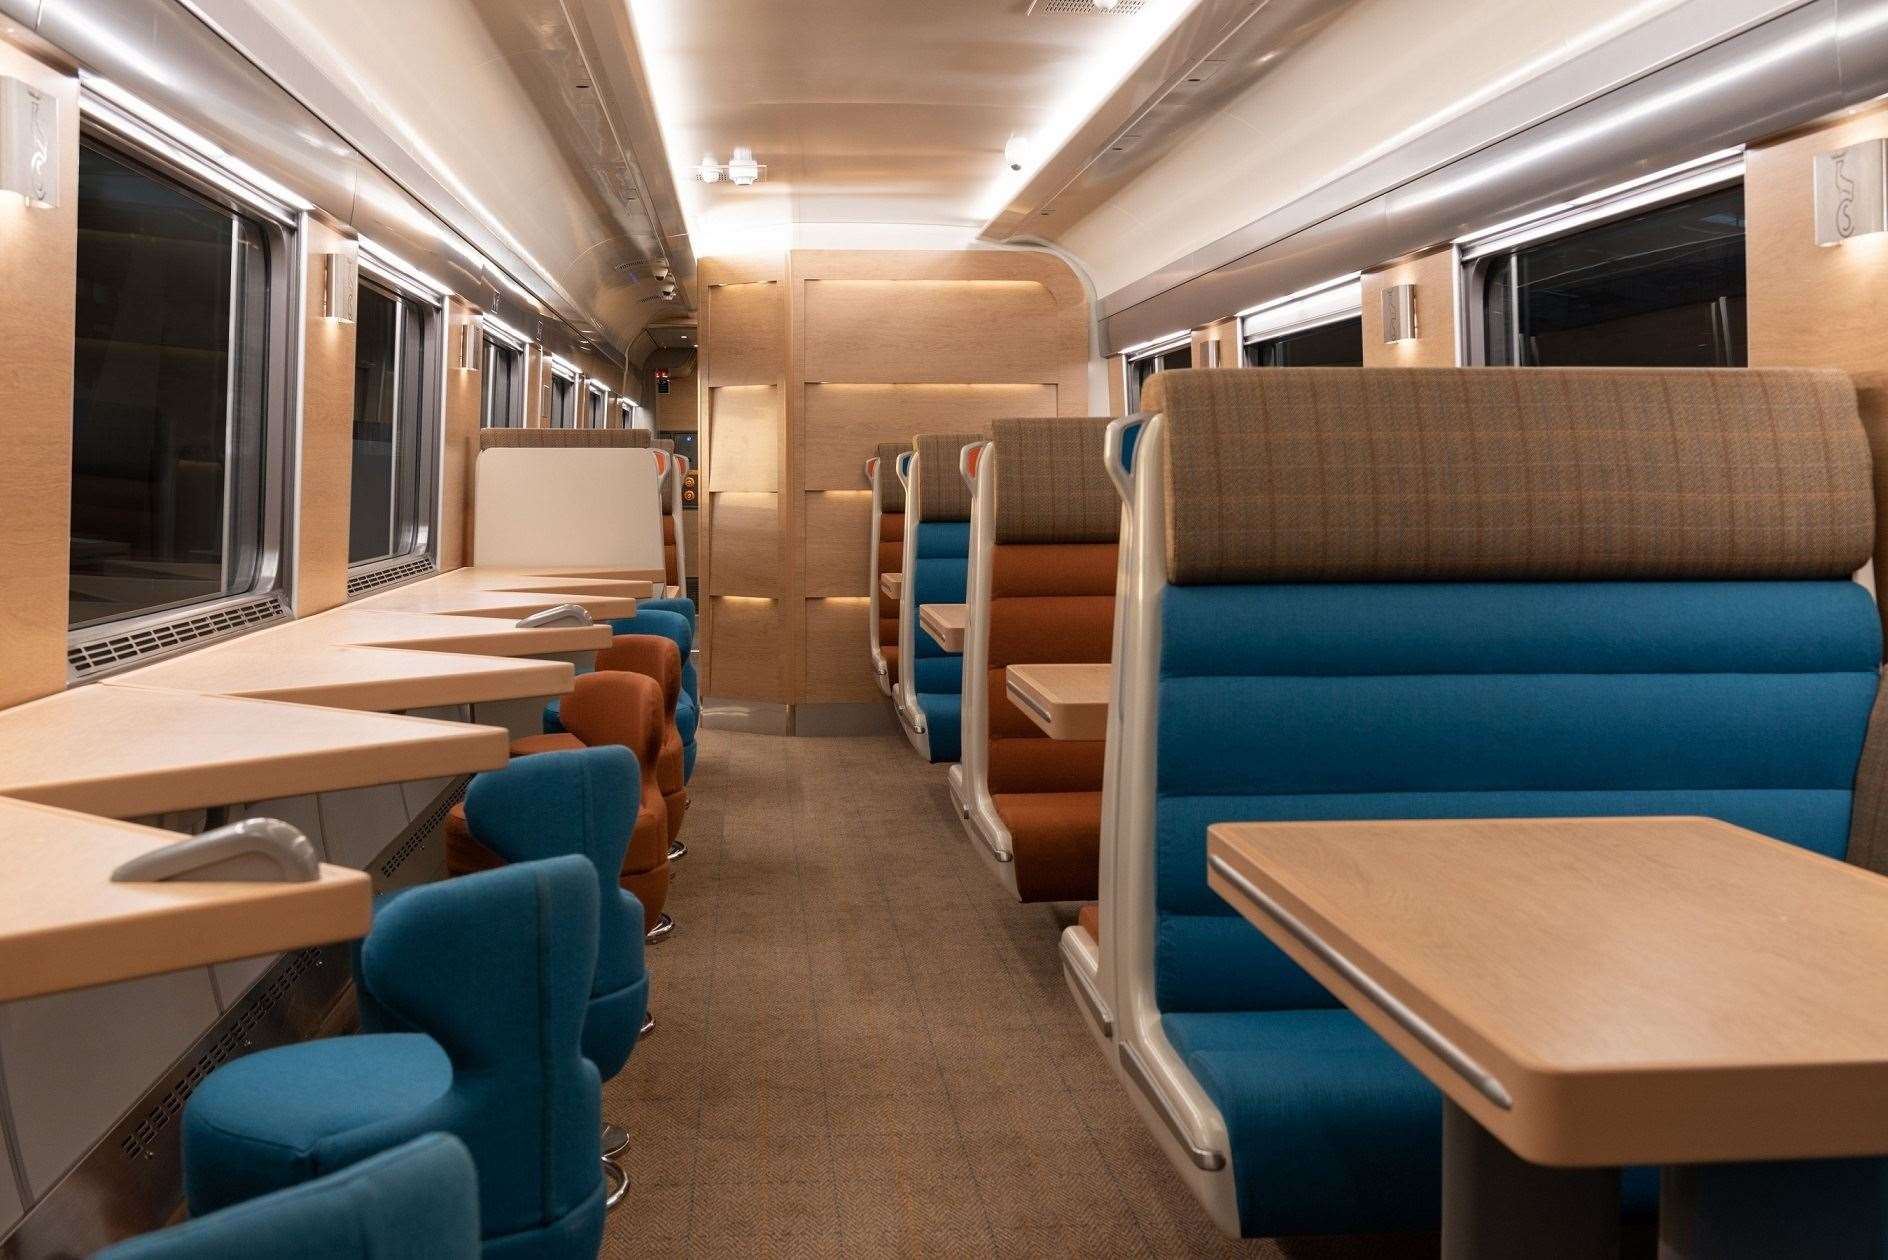 Caledonian Sleeper gives first look inside new trains for